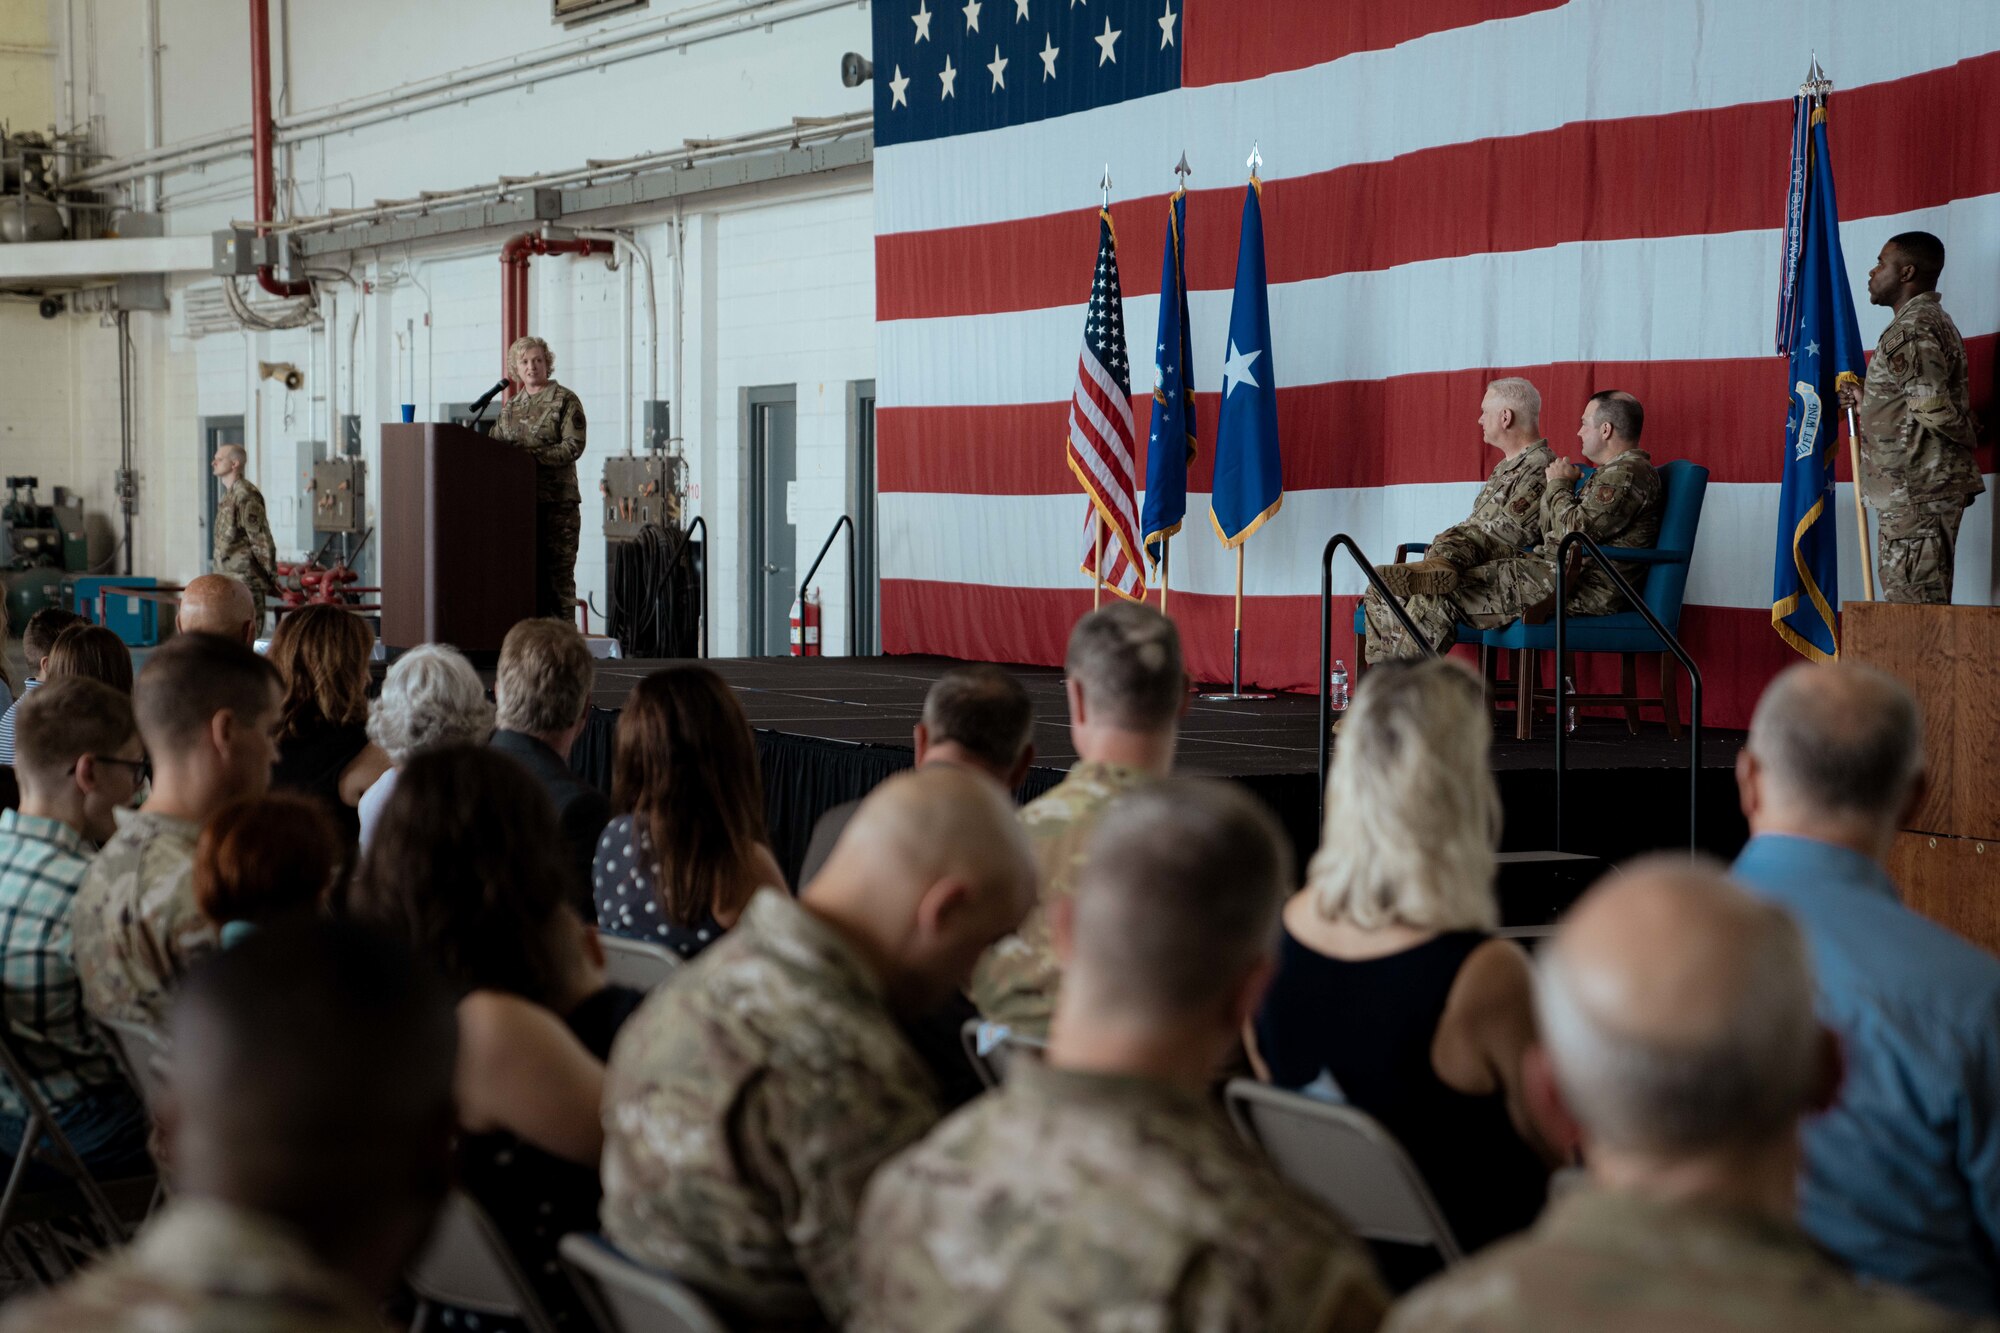 Brig. Gen. Melissa A. Coburn, 22nd Air Force commander, speaks on-stage at the 94th Airlift Wing change of command ceremony.